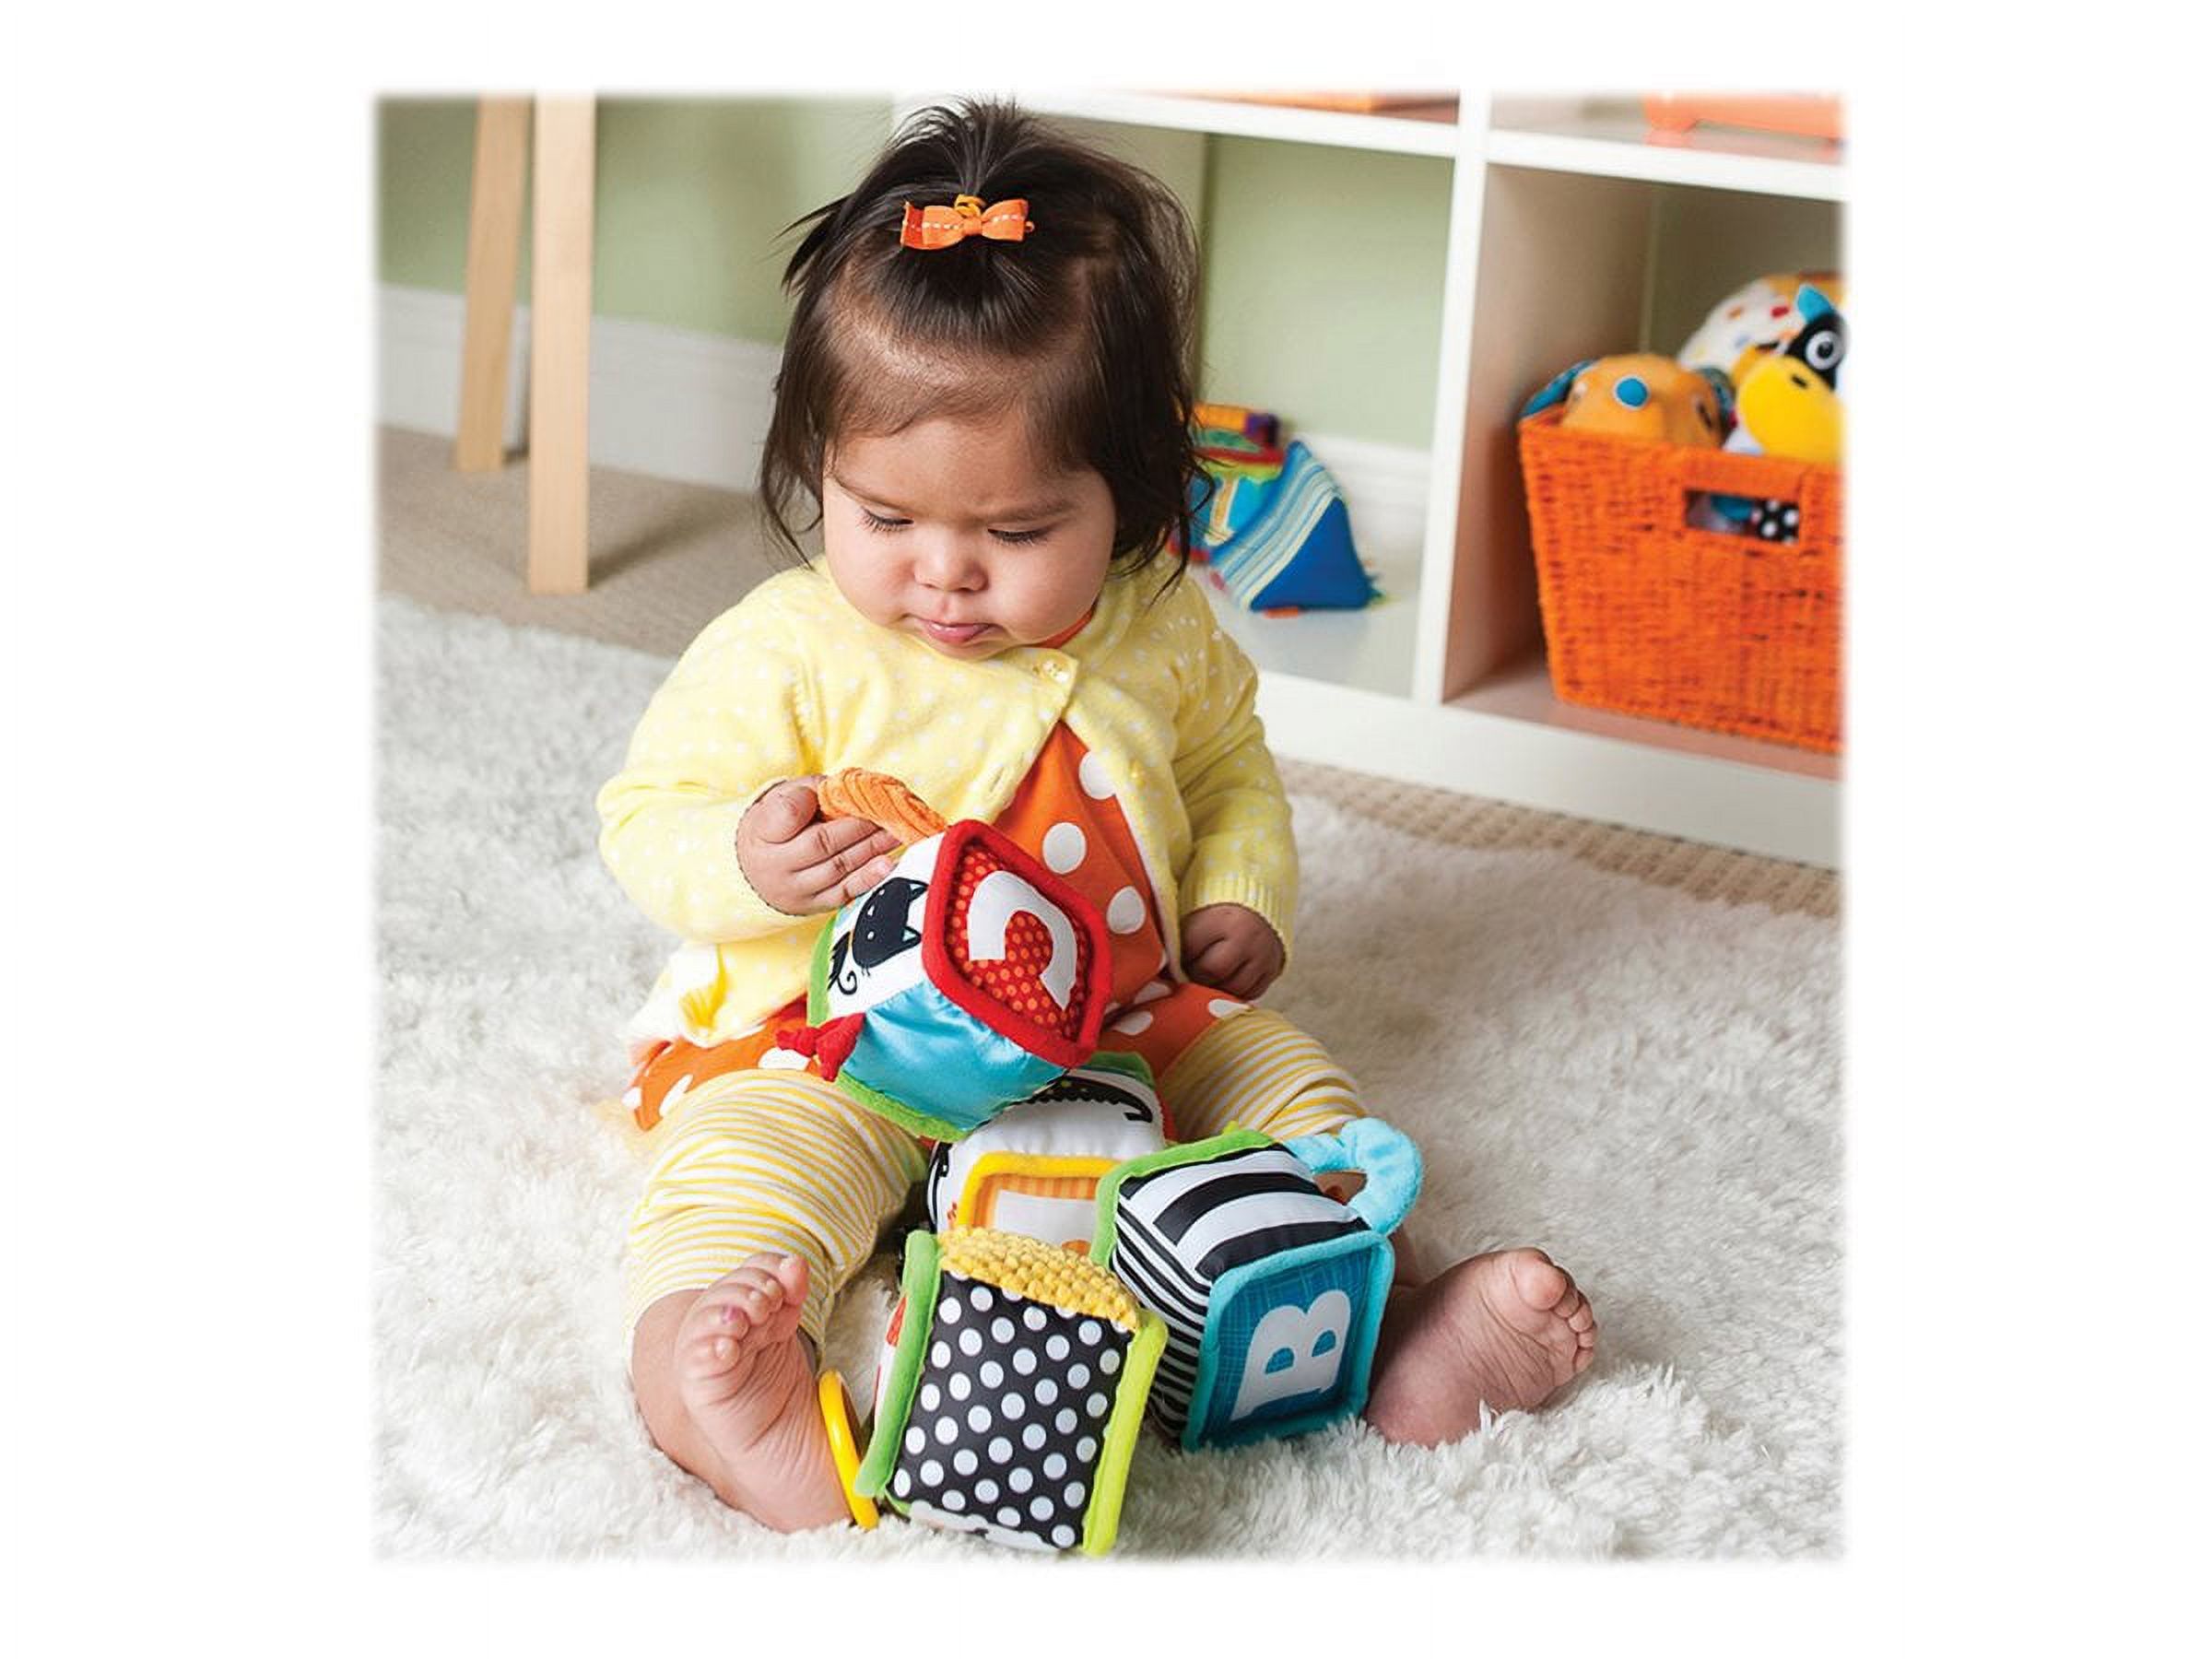 Infantino Discover and Play Soft Blocks Development Toy - image 2 of 3